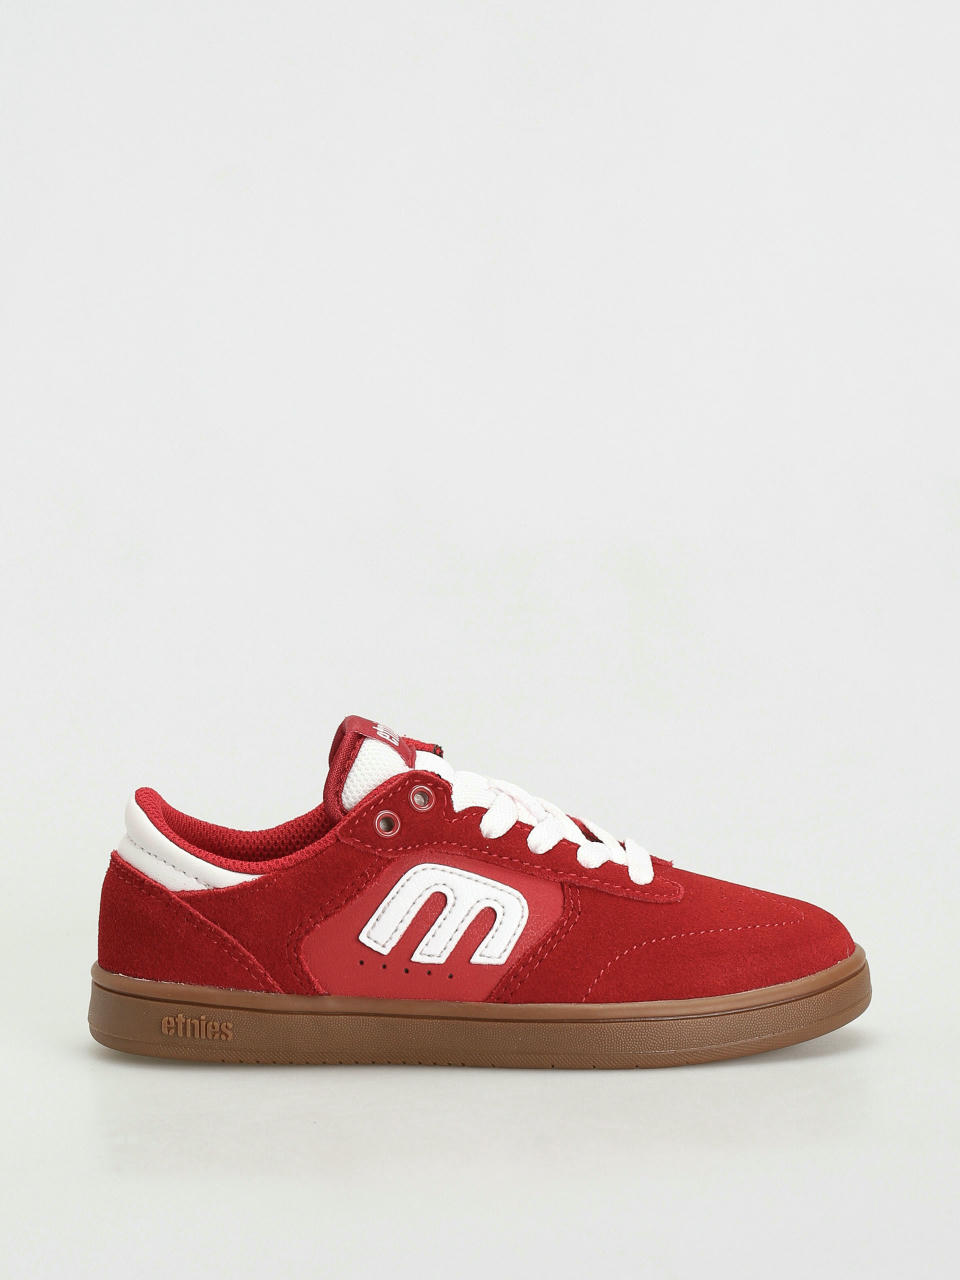 Topánky Etnies Kids Windrow JR (red/white/gum)